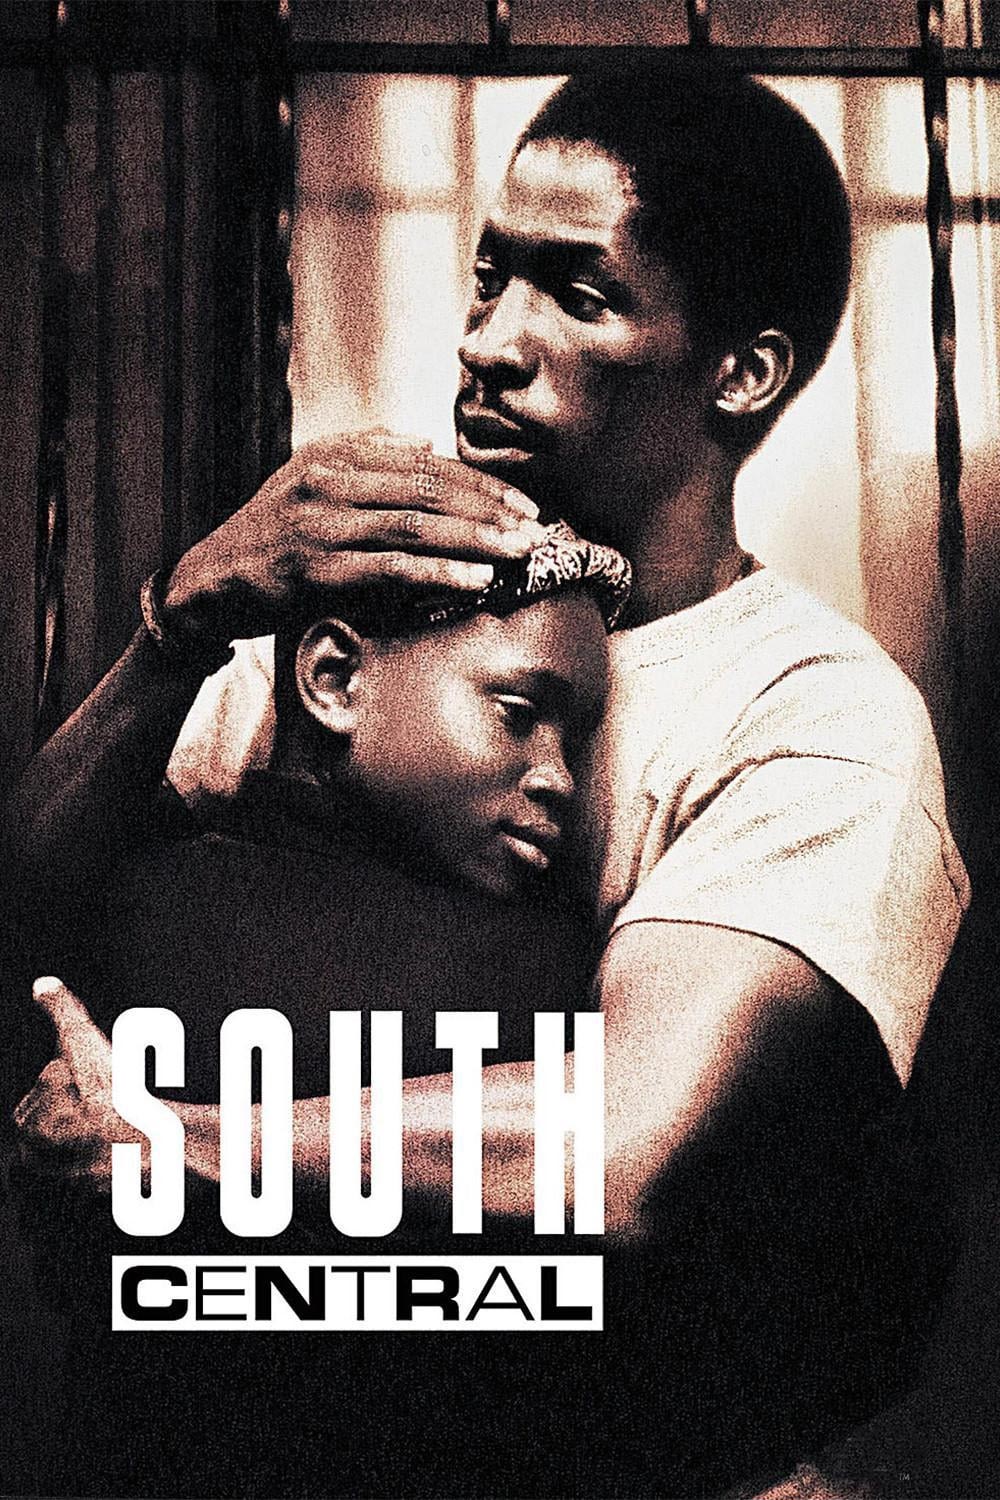 South Central Poster